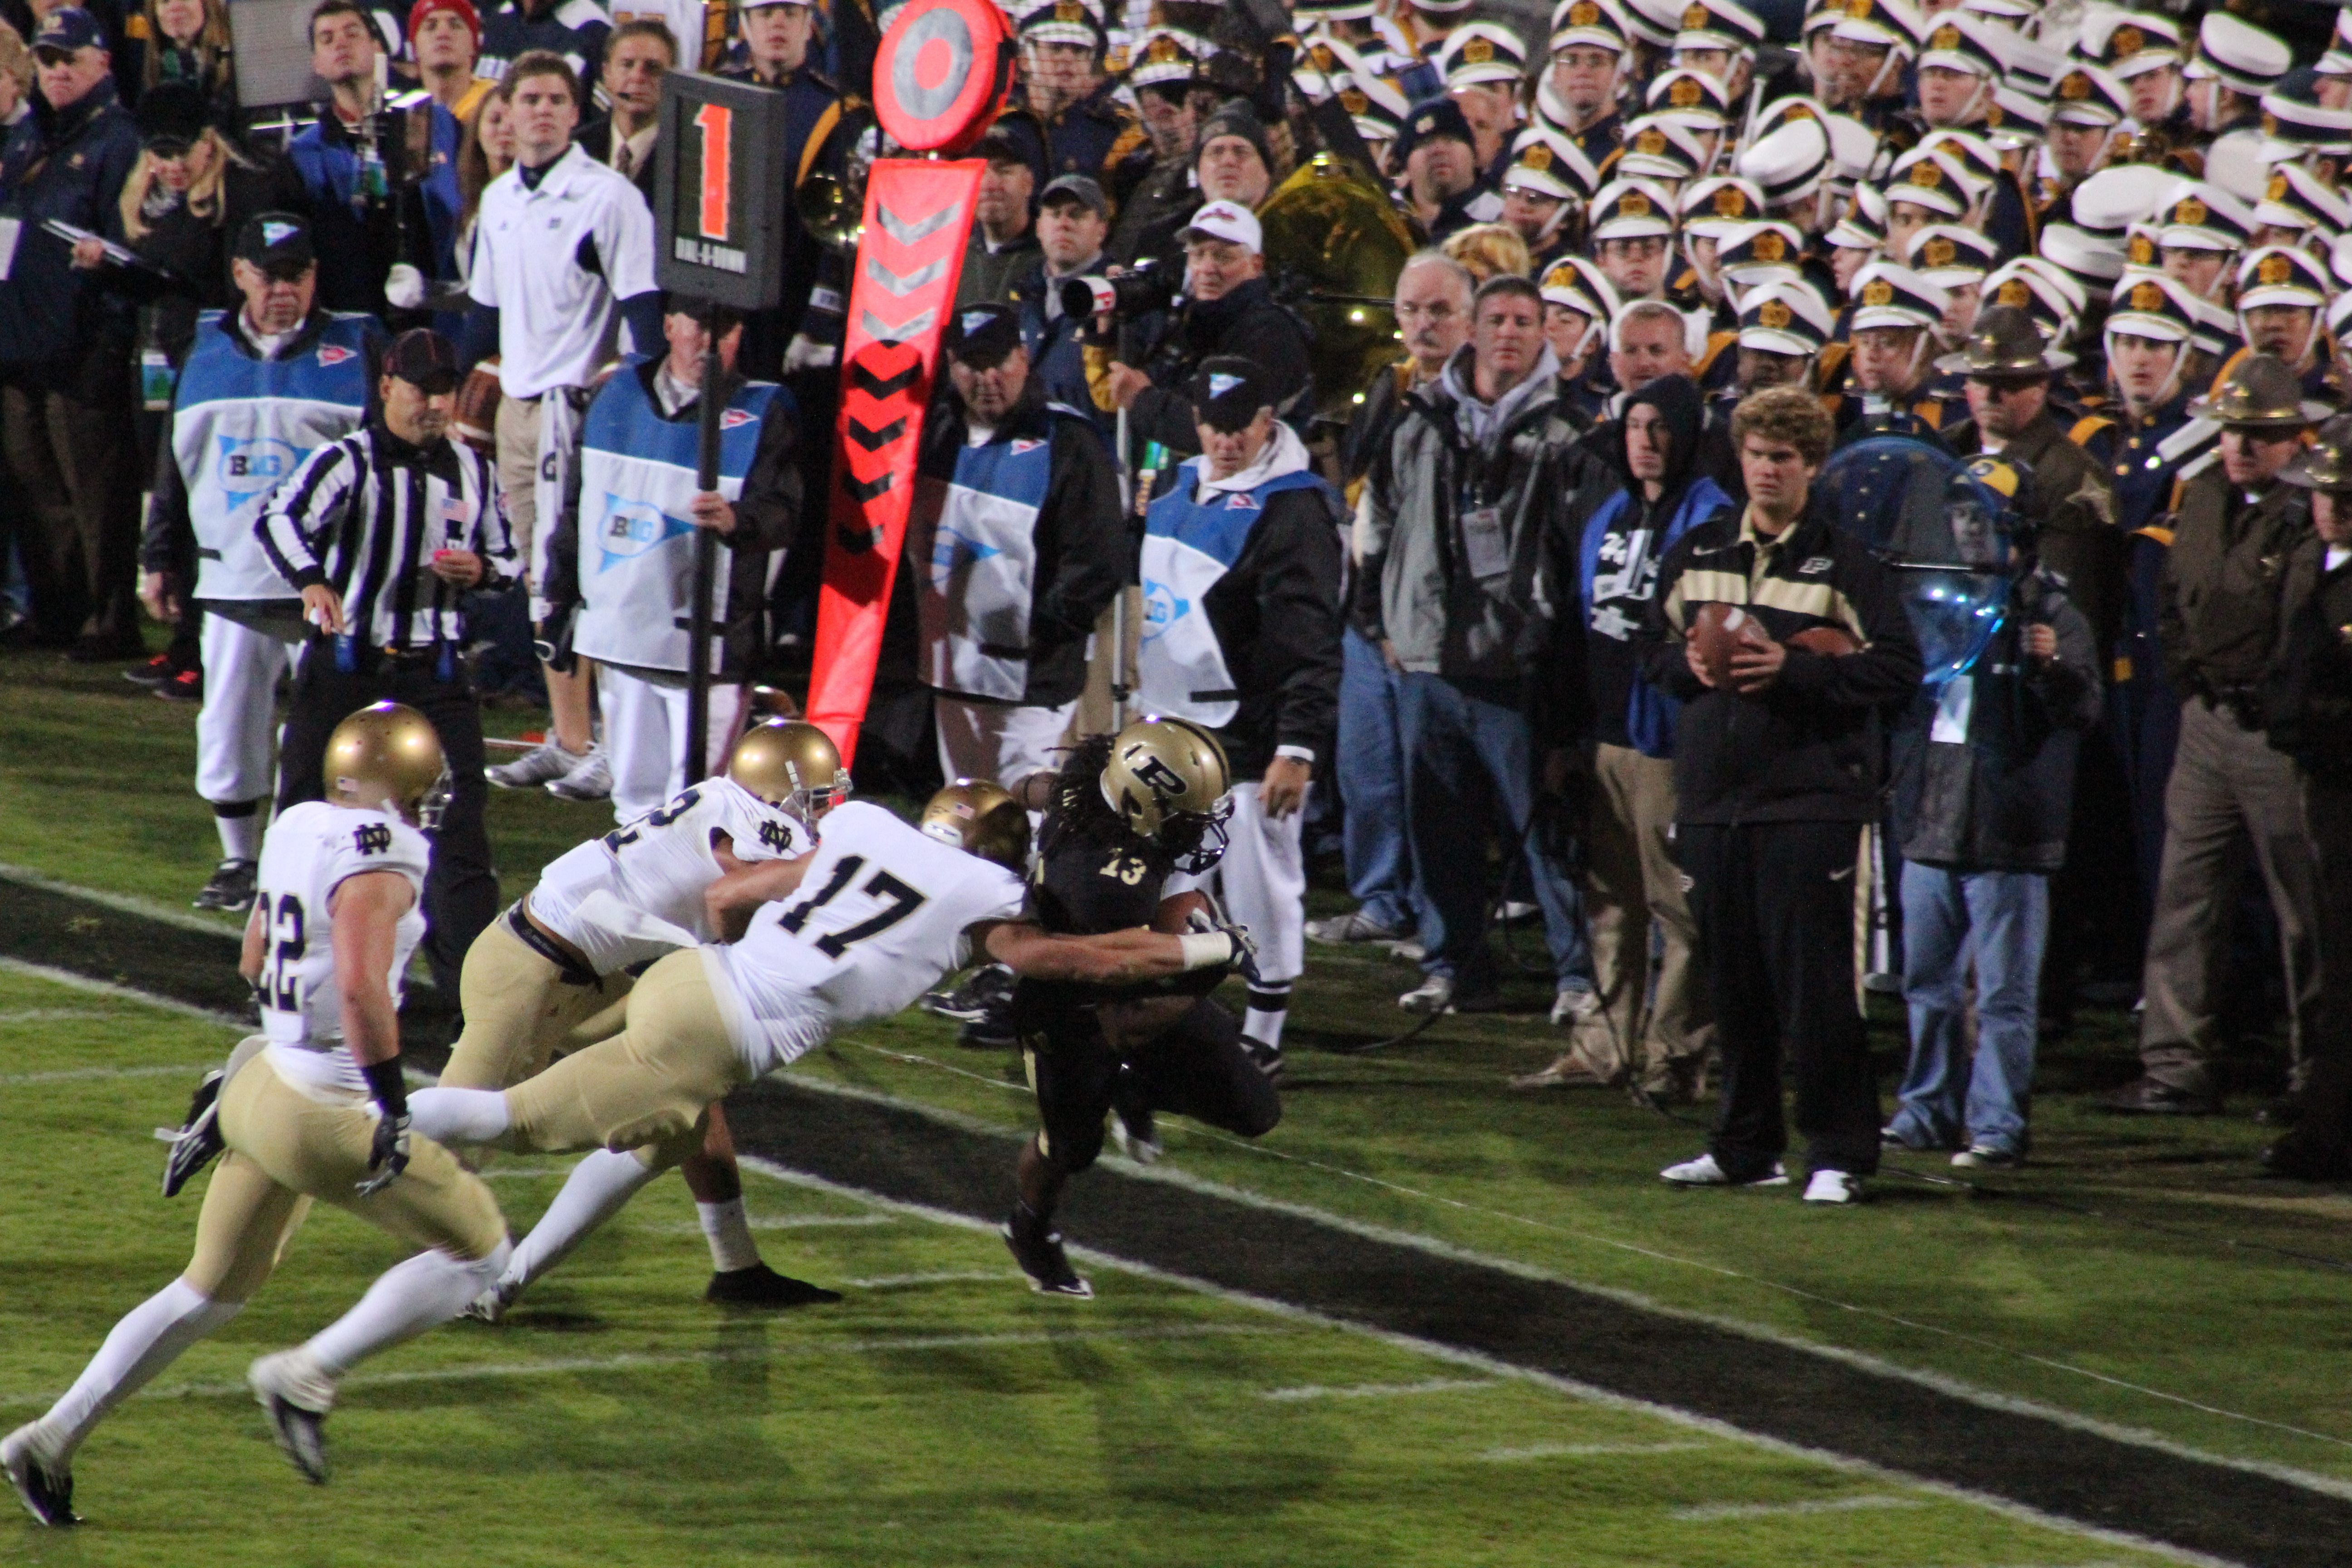 Purdue vs. Notre Dame Photo Gallery | Confessions of a Sports Junkie